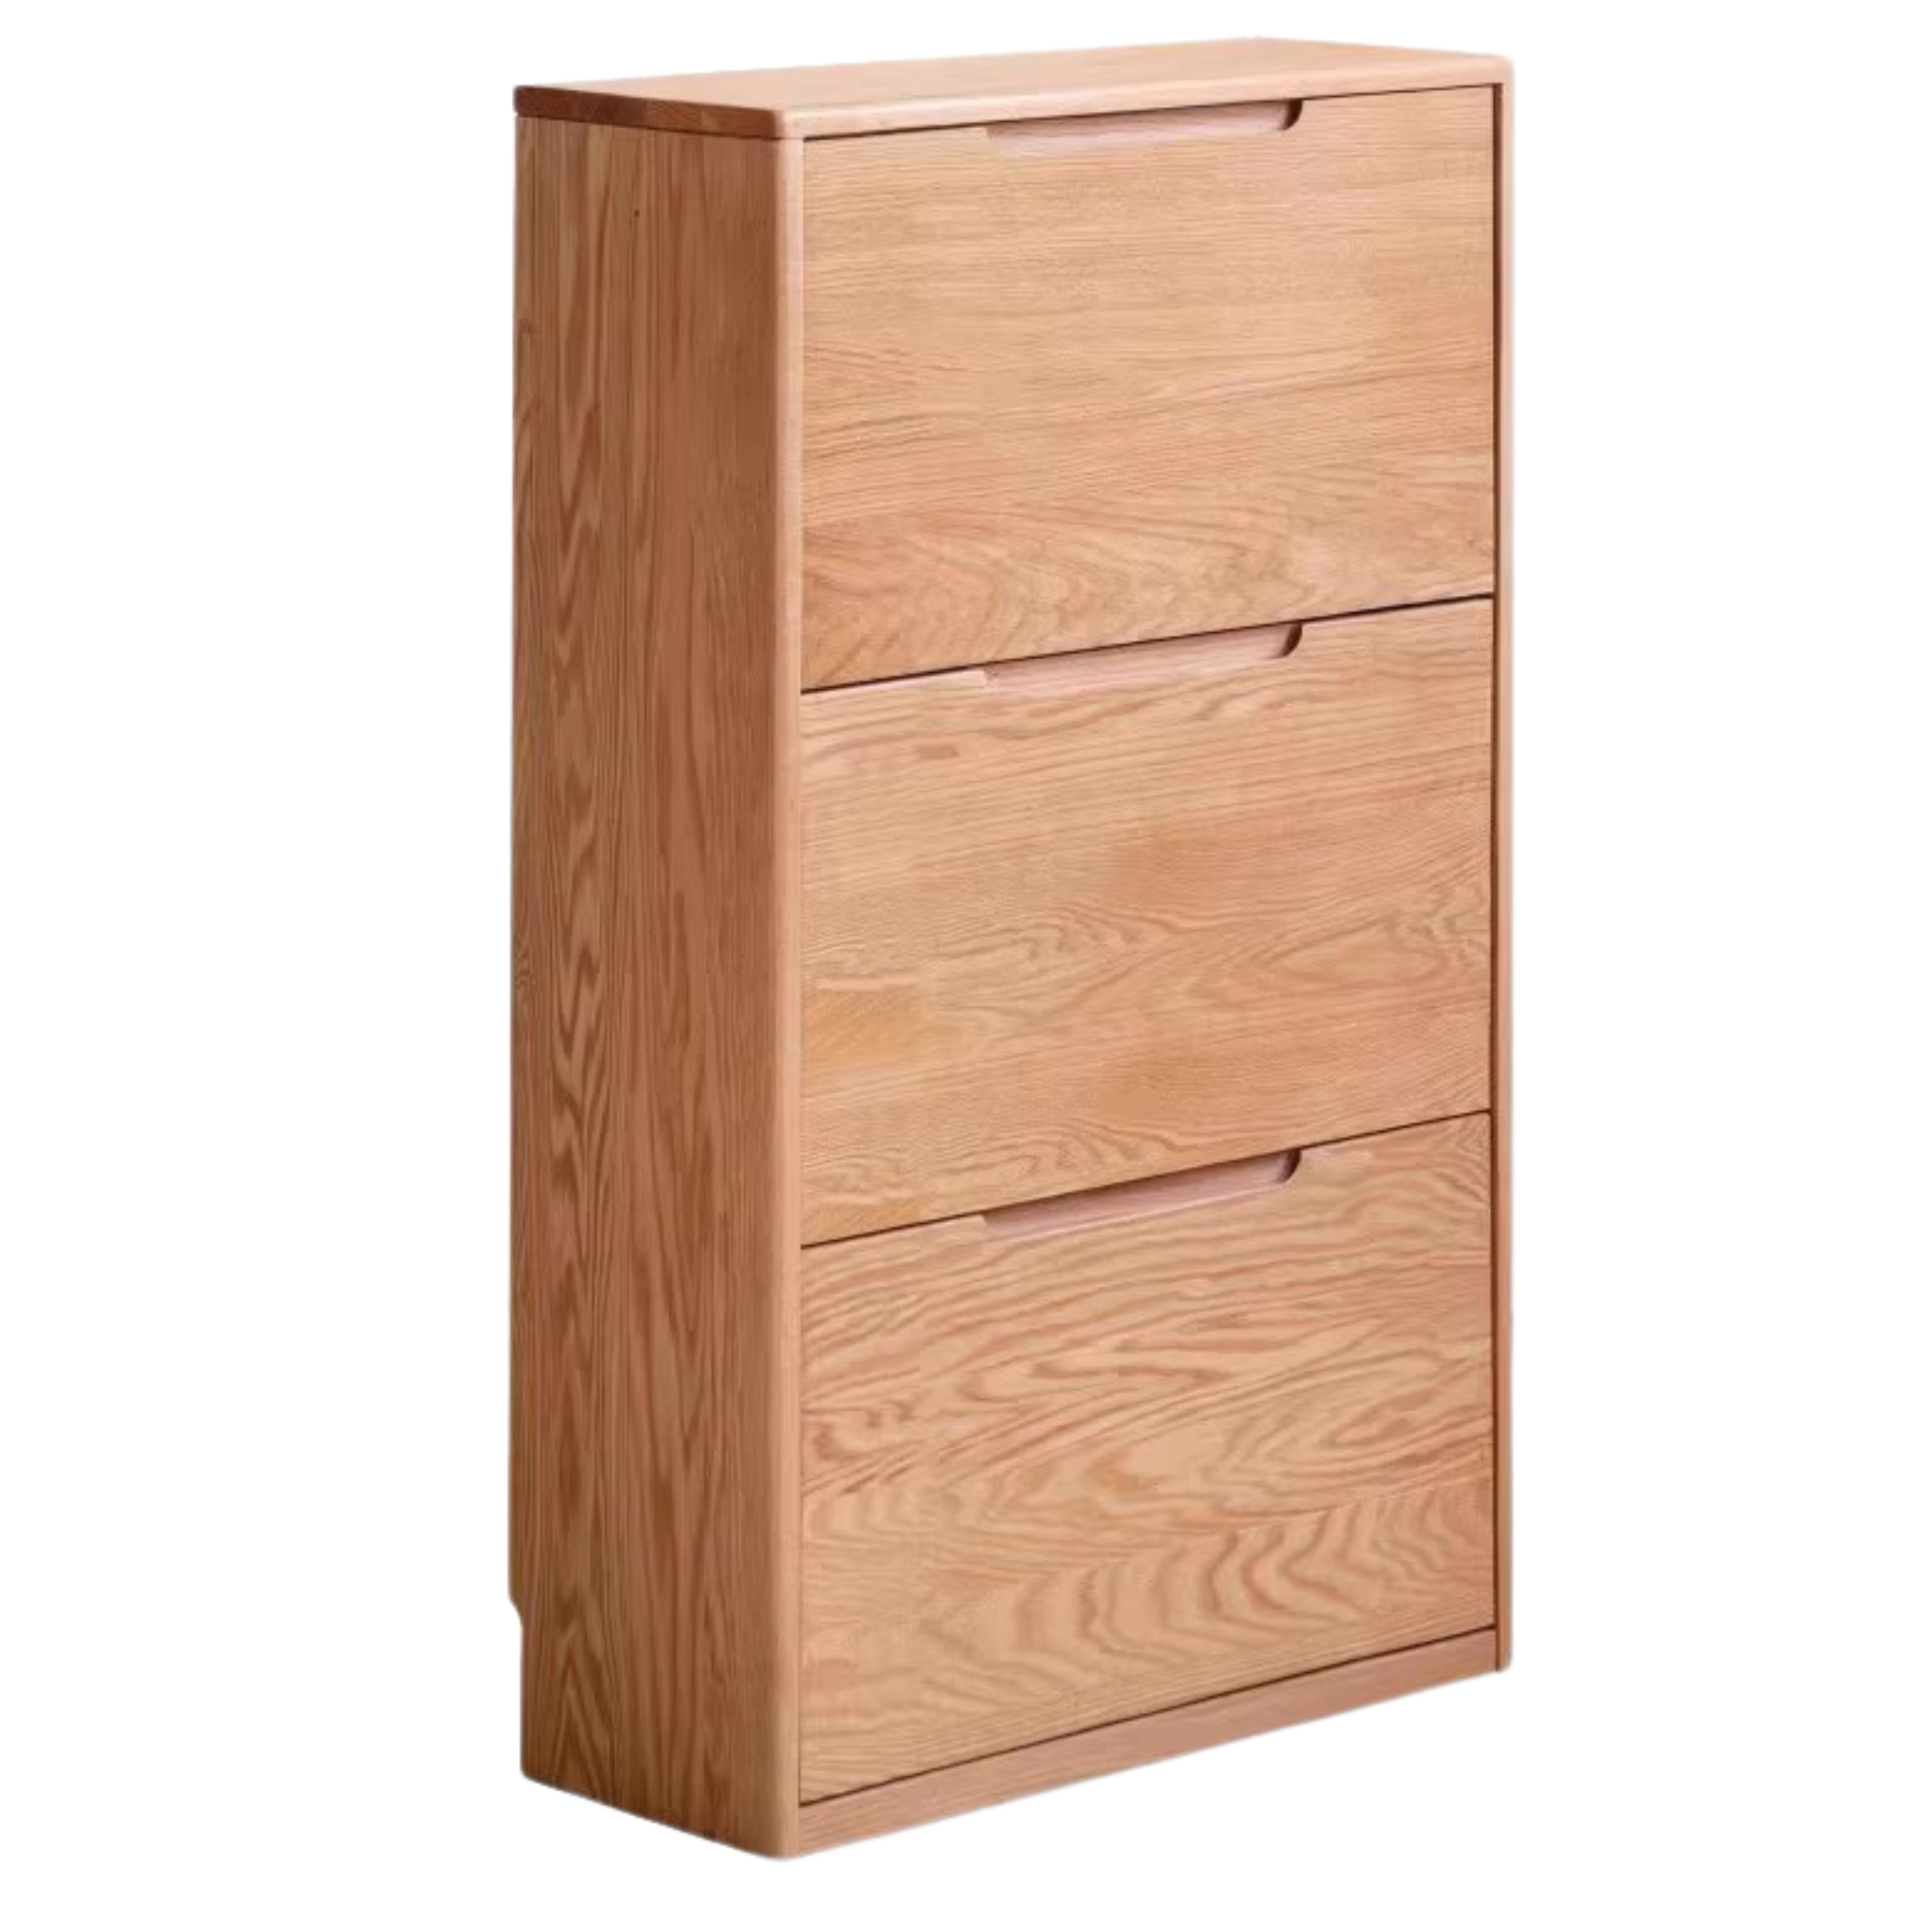 Oak solid wood ultra-thin shoe cabinet home door entry porch cabinet